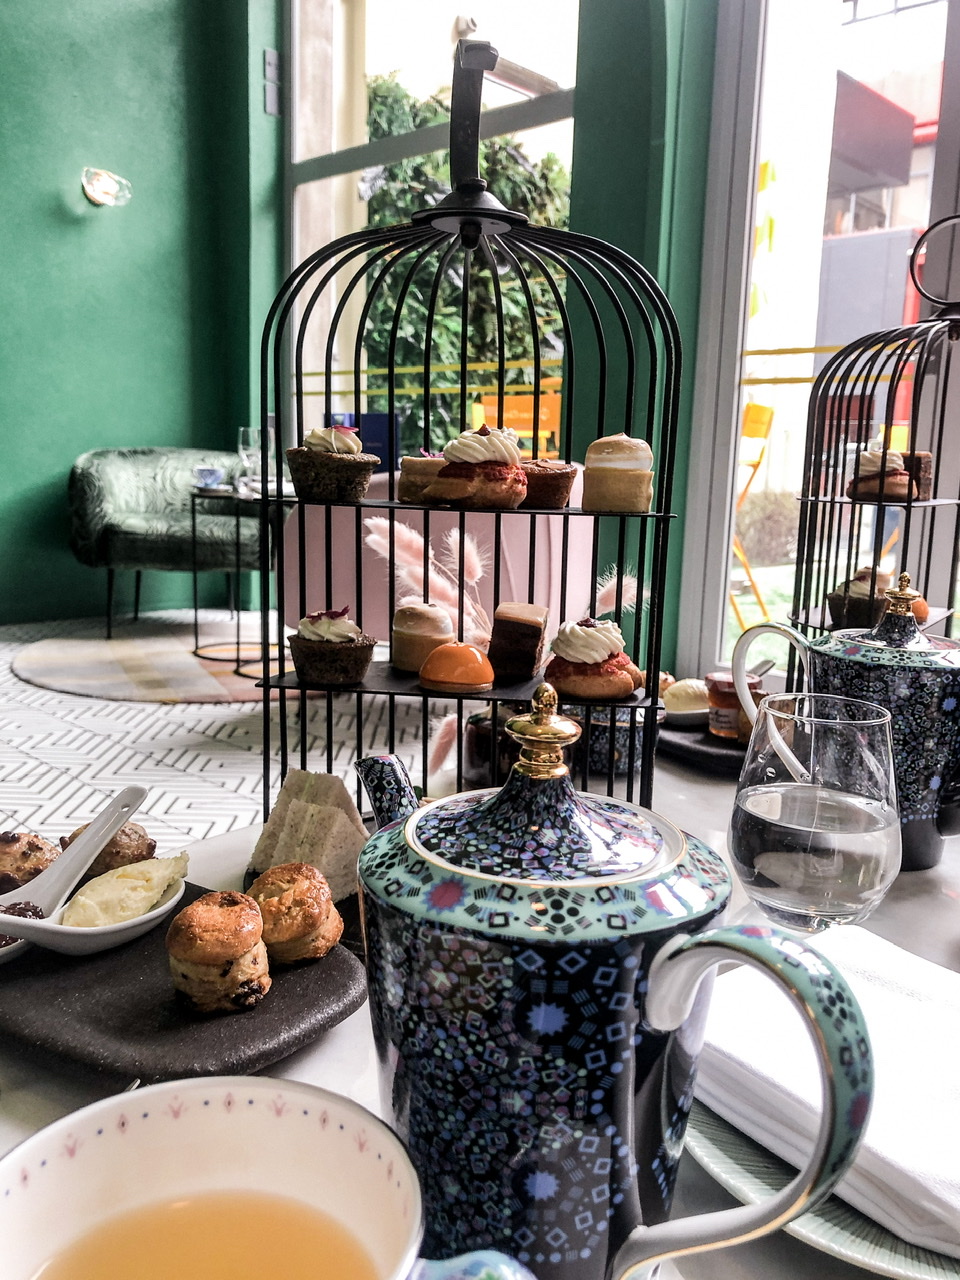 Three tiered high tea stand with plate of four small scones with cream, talk blue flowery tea pot and poured cup of herbal tea in foreground, green painted wall, window and couch in background